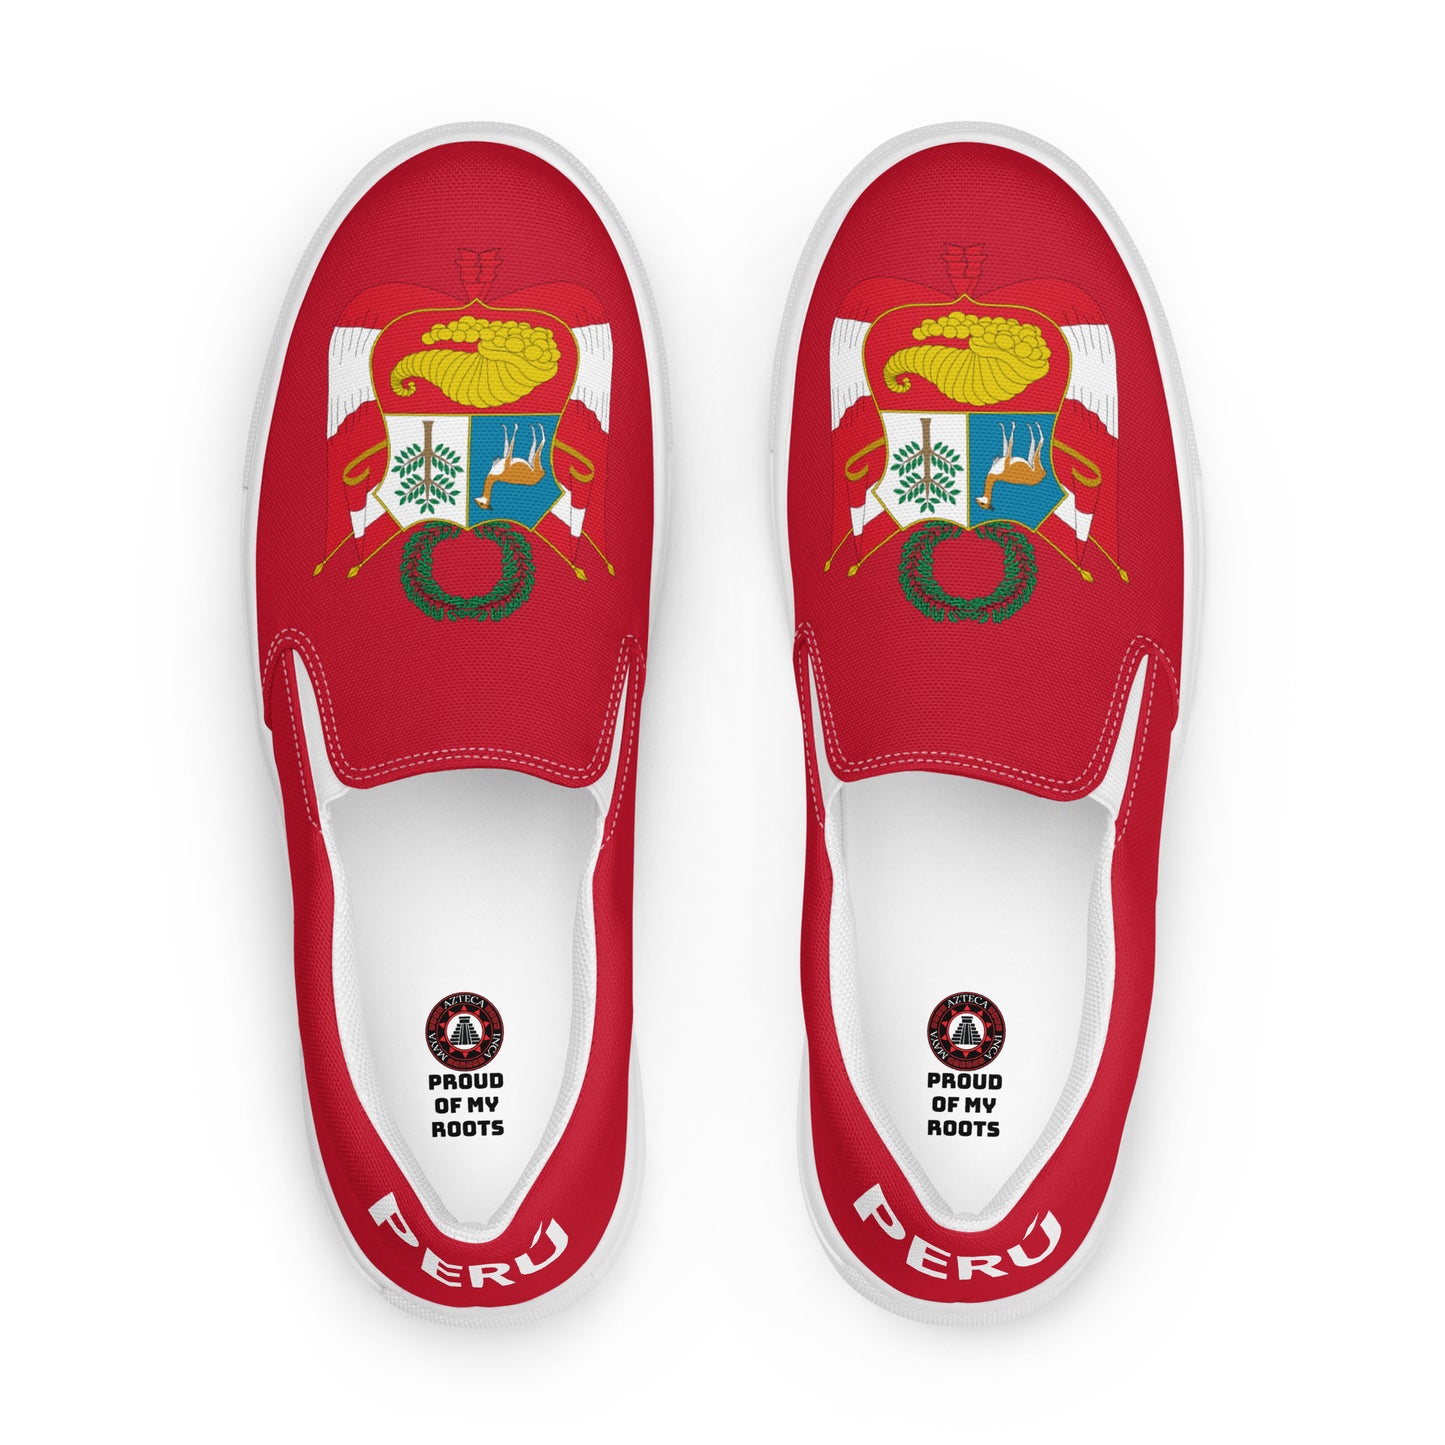 Perú - Women - Red - Slip-on shoes